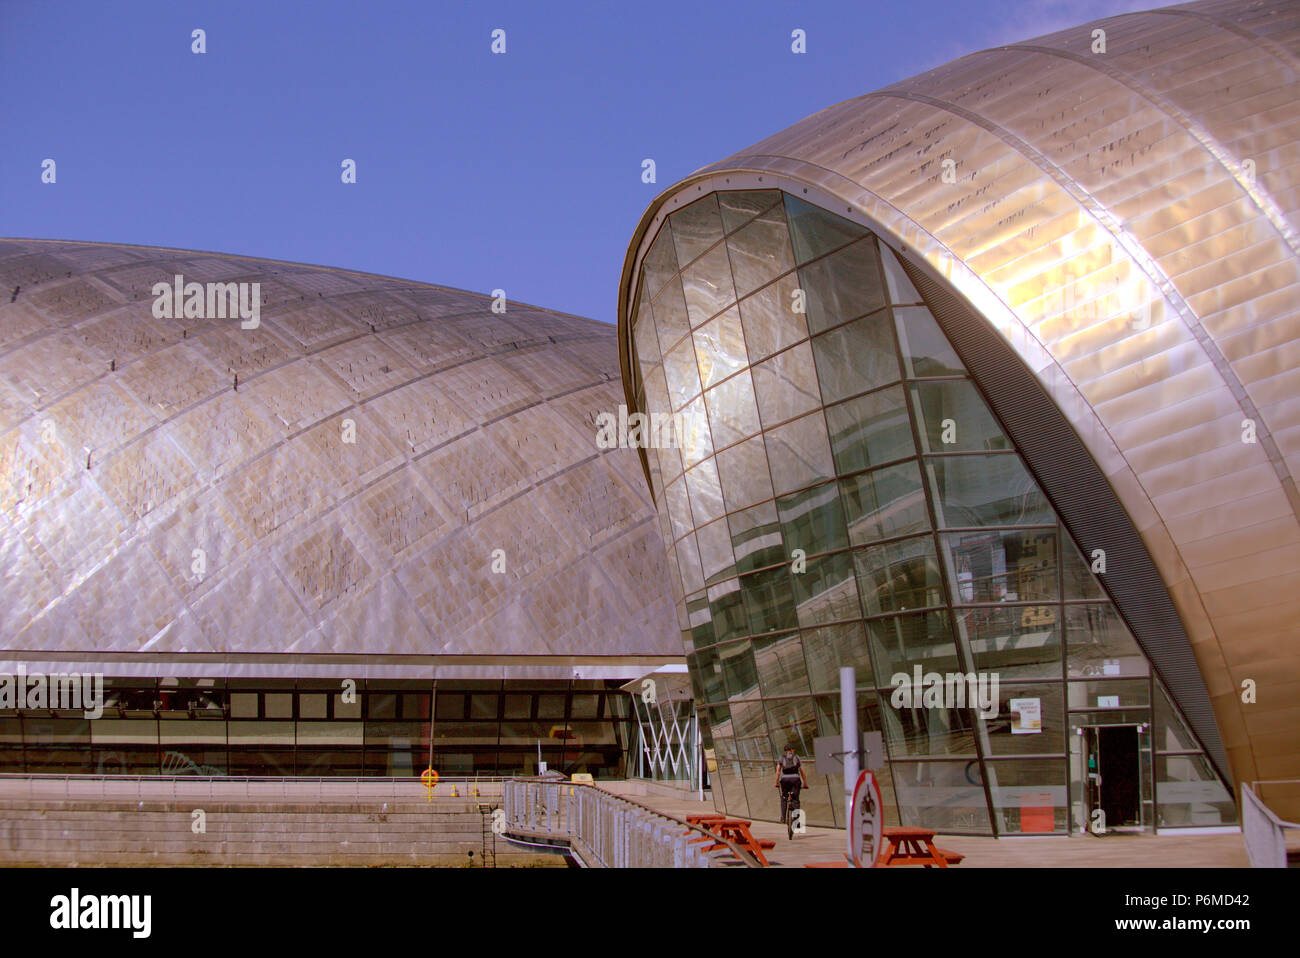 Glasgow, Scotland, UK 1st July. UK Weather:Sunny sizzling weather continues and The weather proof cover on Glasgow Science Centre's roof that melted at the start of the scorching weather, continues to drip, the black drips down the building.It look lovely in the Golden sunlight . Credit: gerard ferry/Alamy Live News Stock Photo